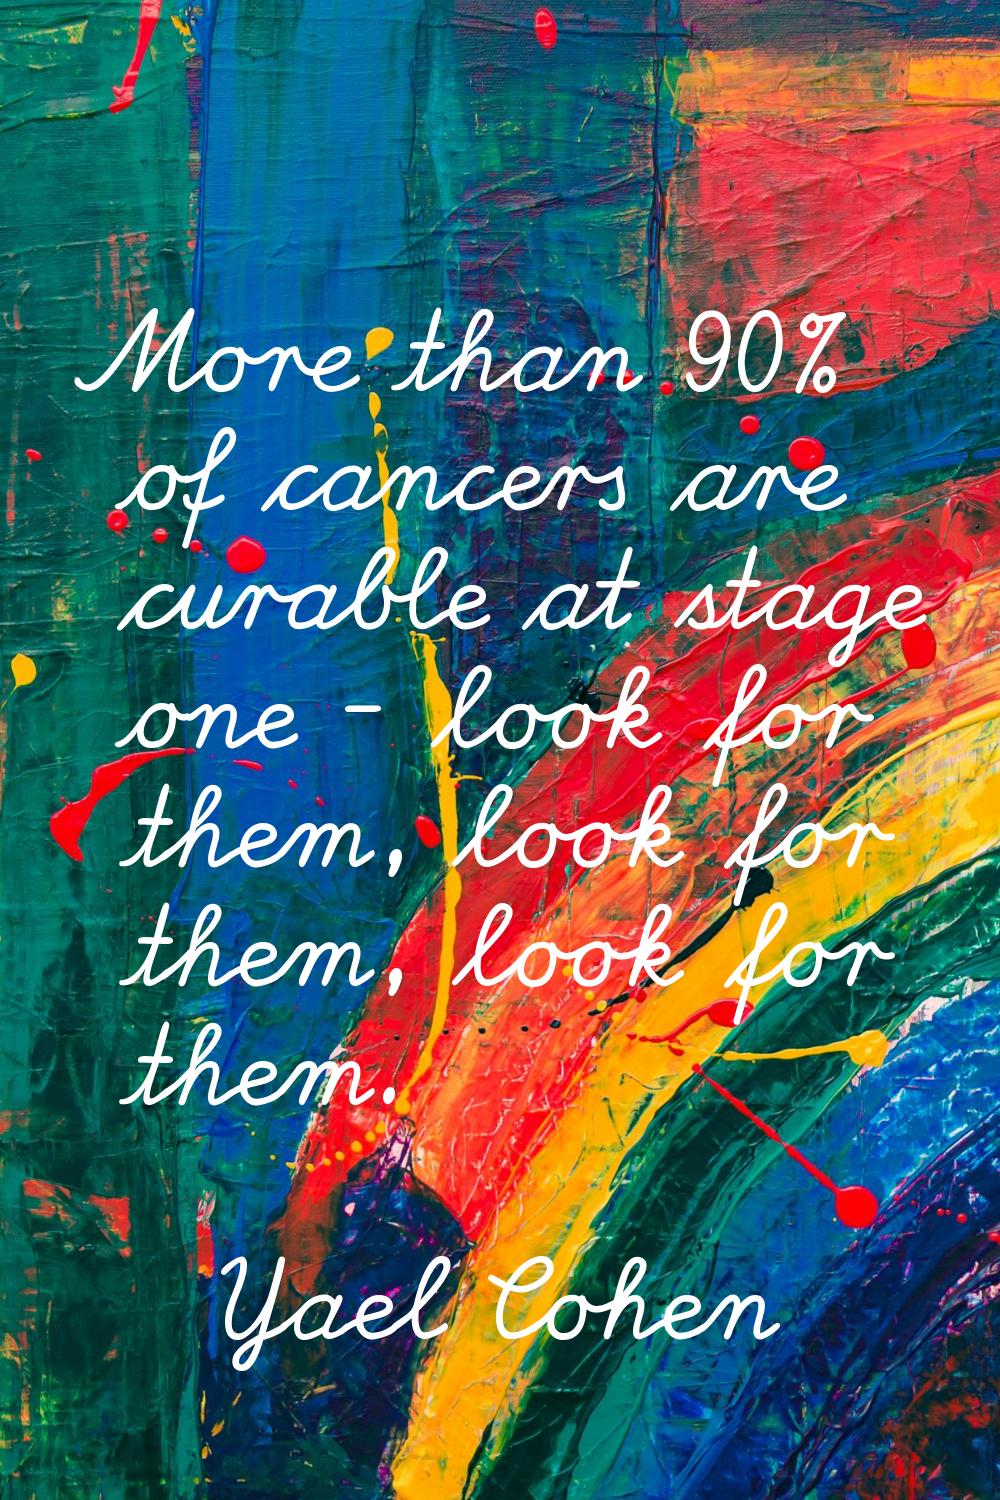 More than 90% of cancers are curable at stage one - look for them, look for them, look for them.